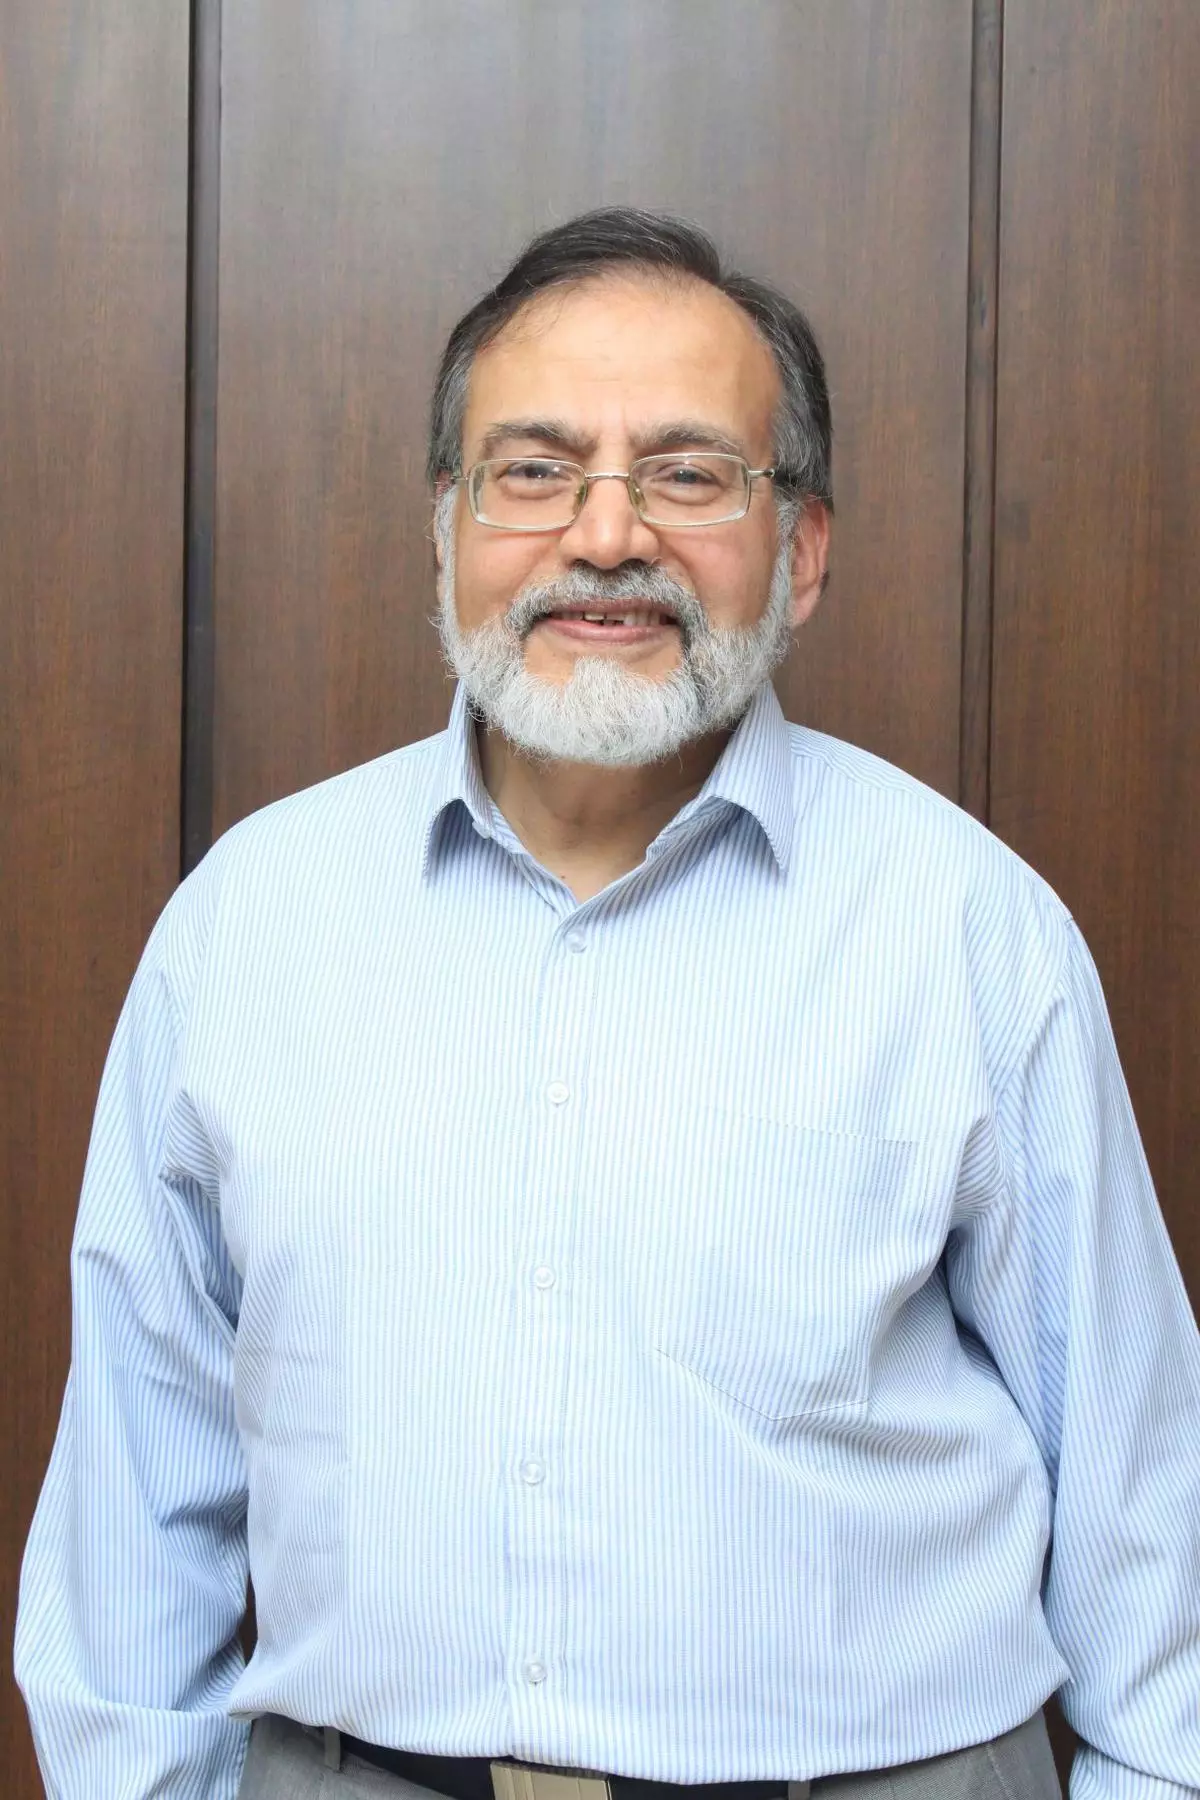 M F Farooqui, Chairman of the Board of Directors, Ramco Cements